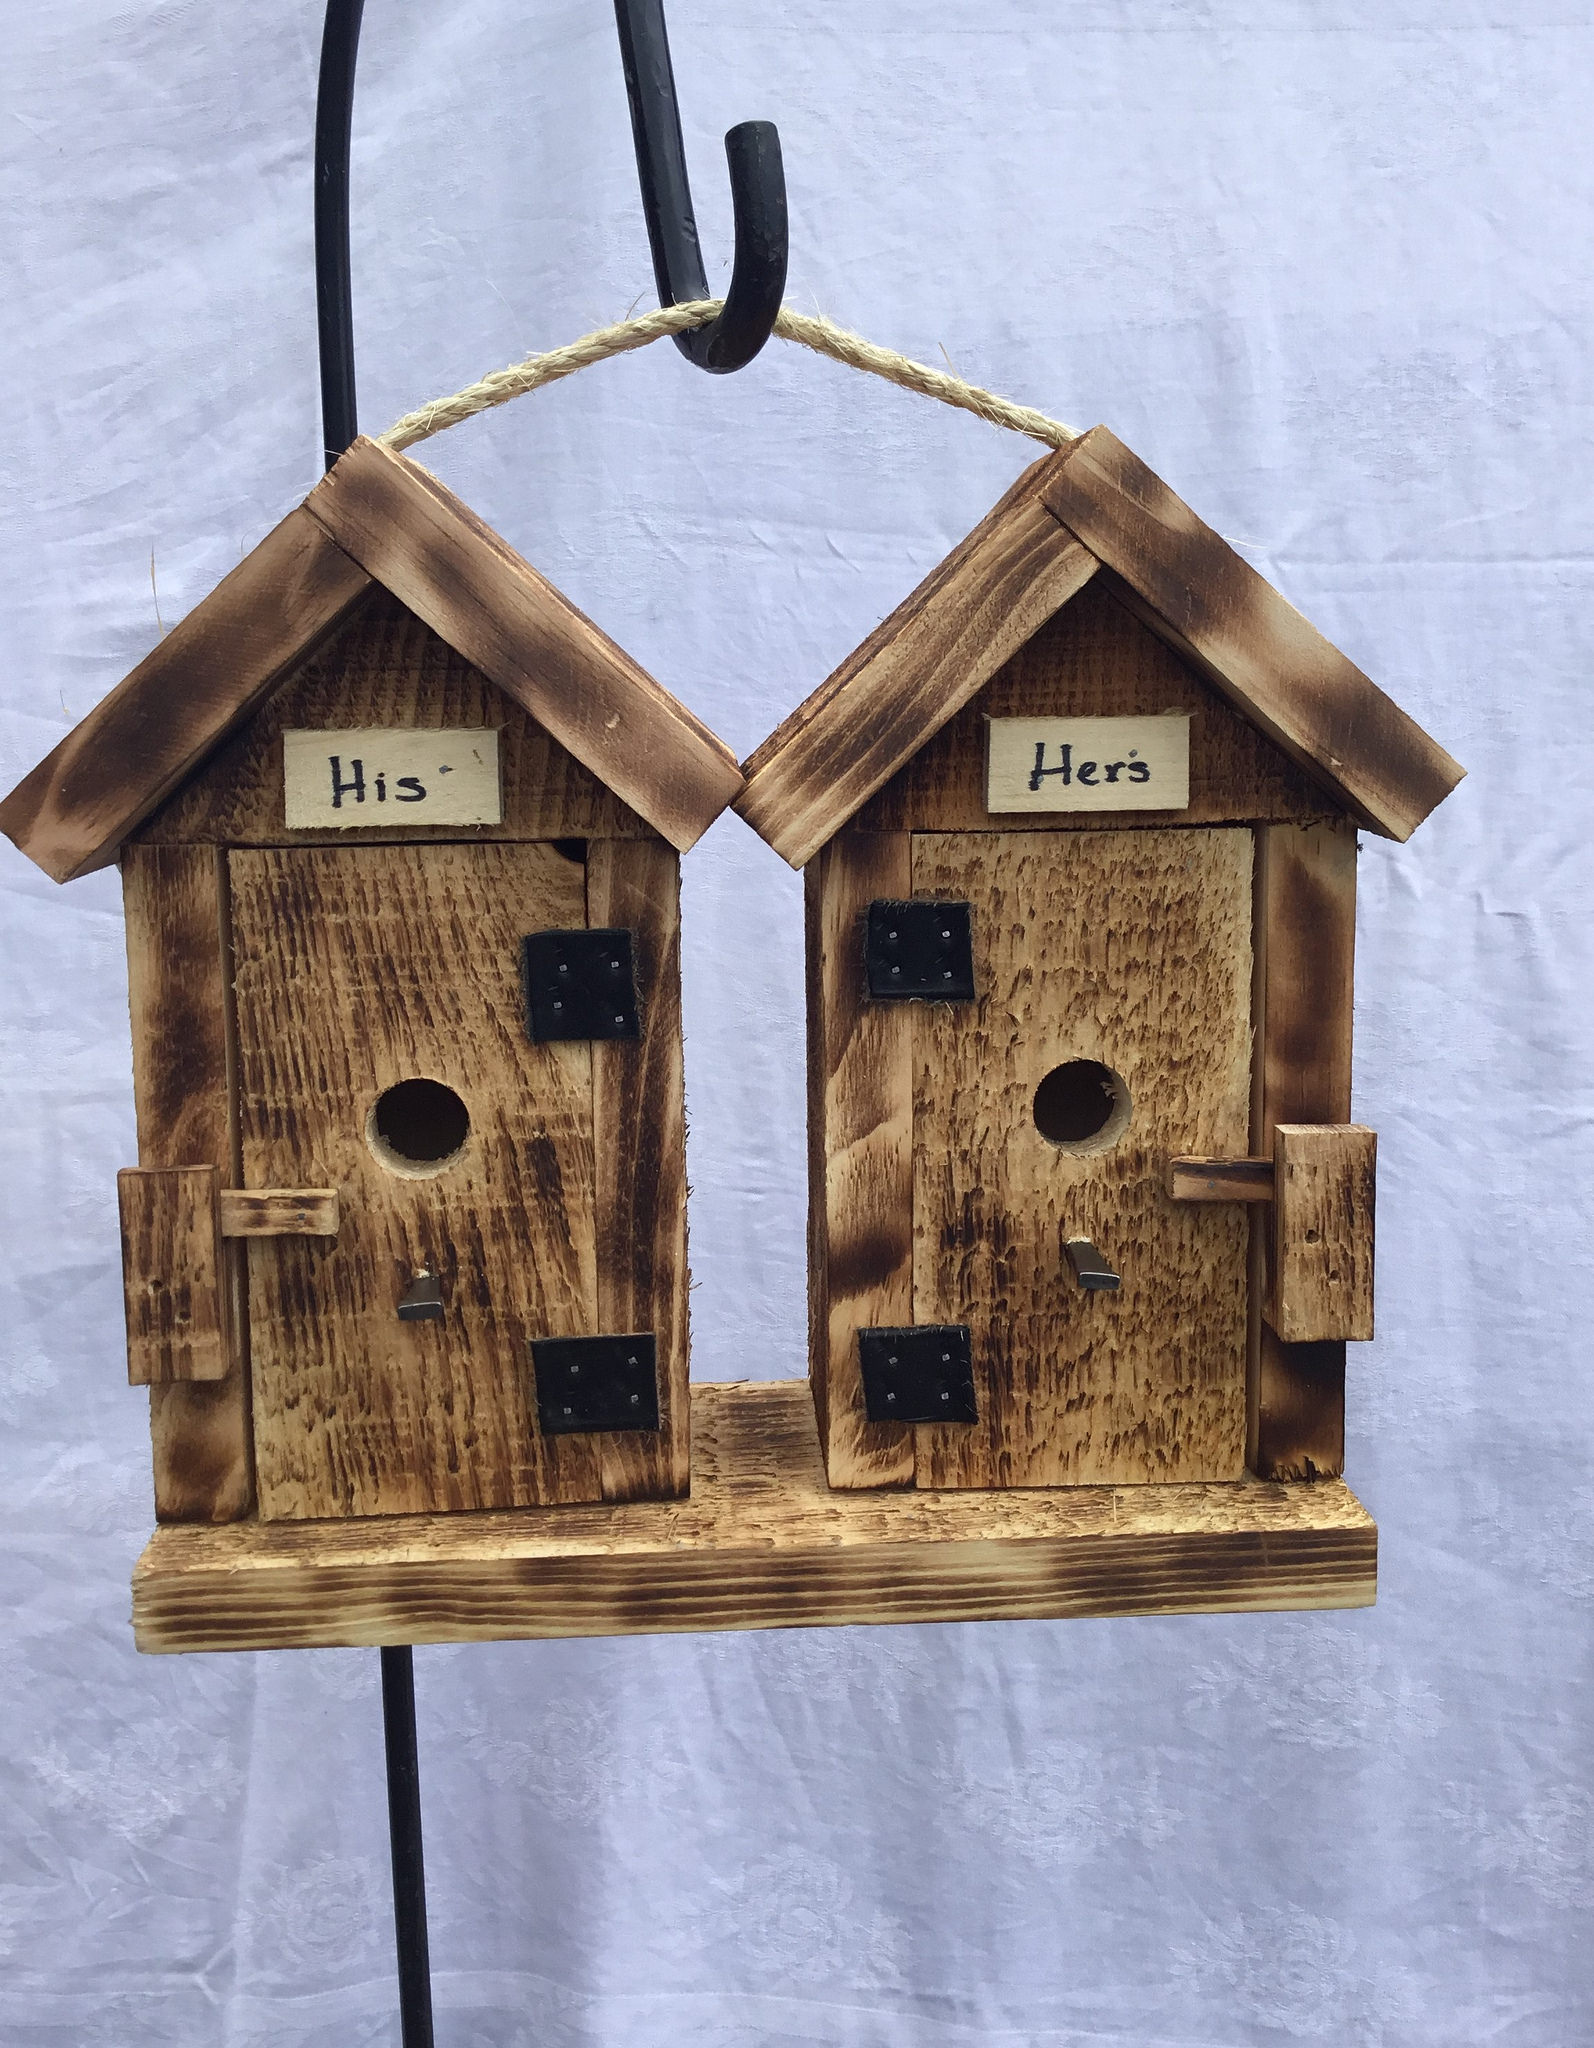 Burnt Pine His and Hers Bird Houses - image 2 of 2